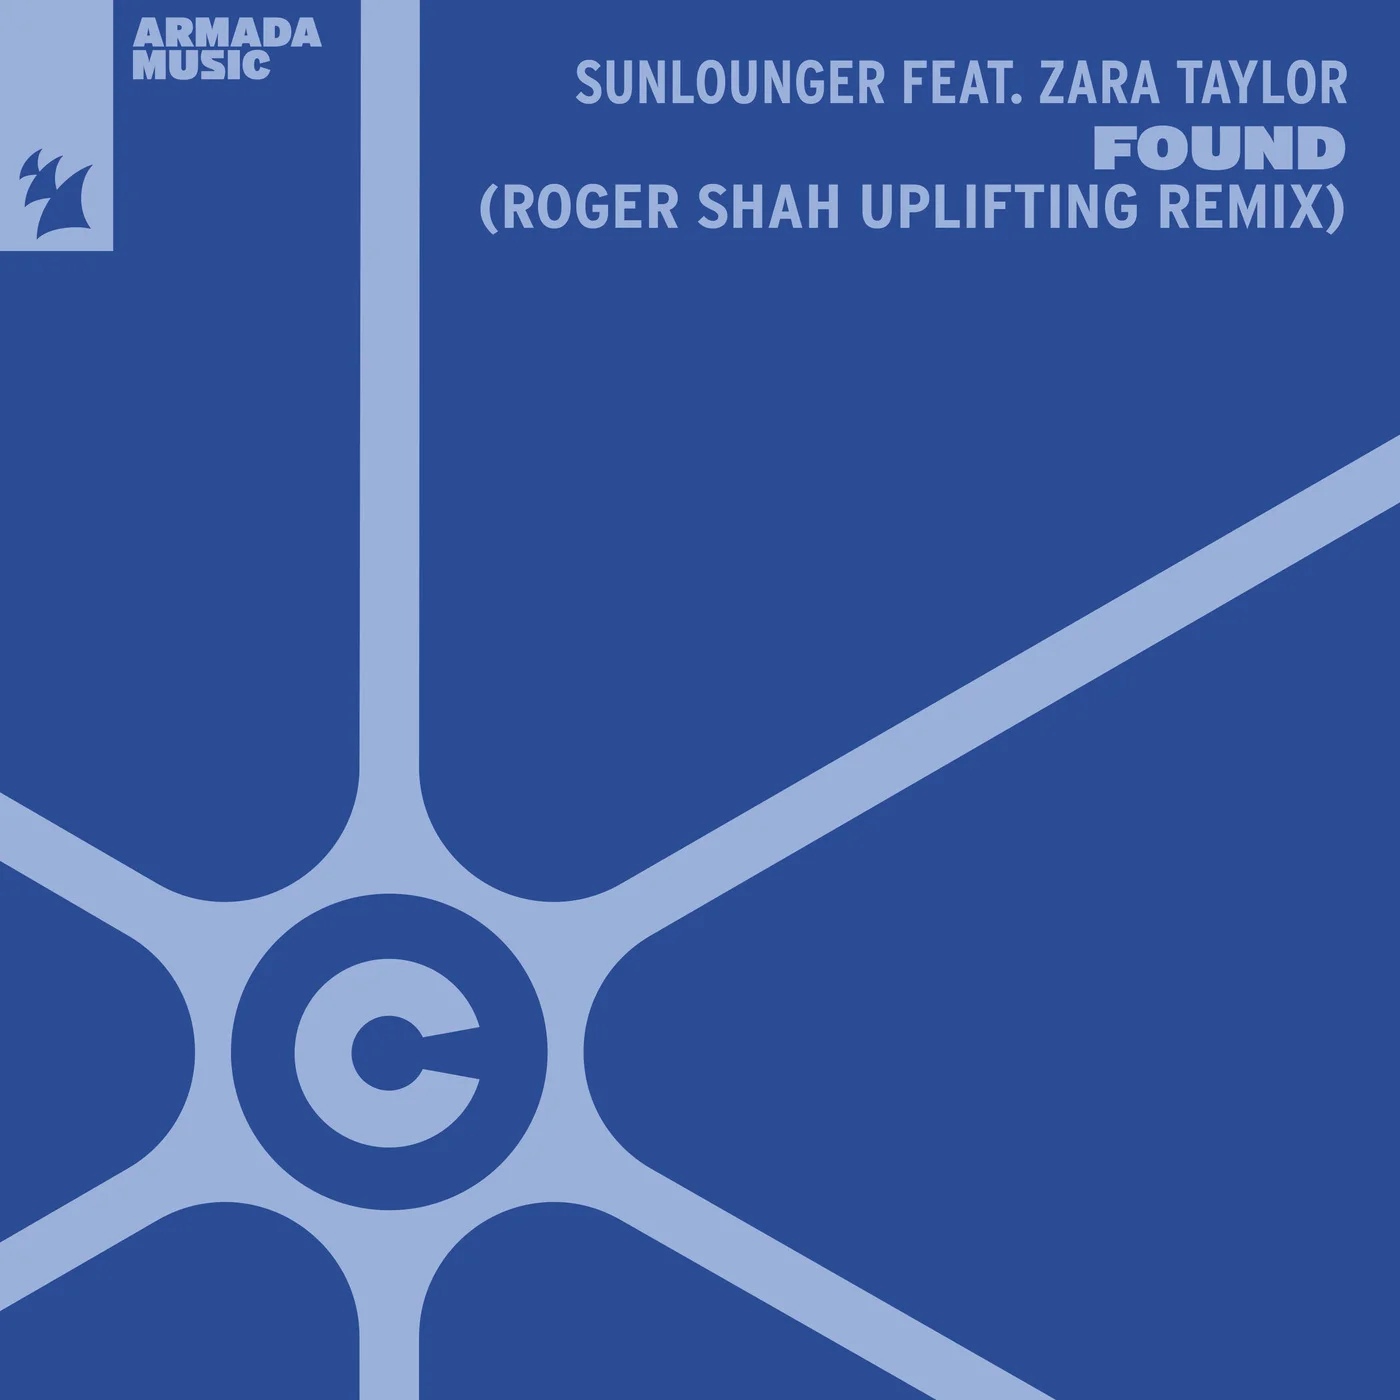 Sunlounger ft. featuring Zara Taylor Found (Roger Shah Uplifting Remix) cover artwork